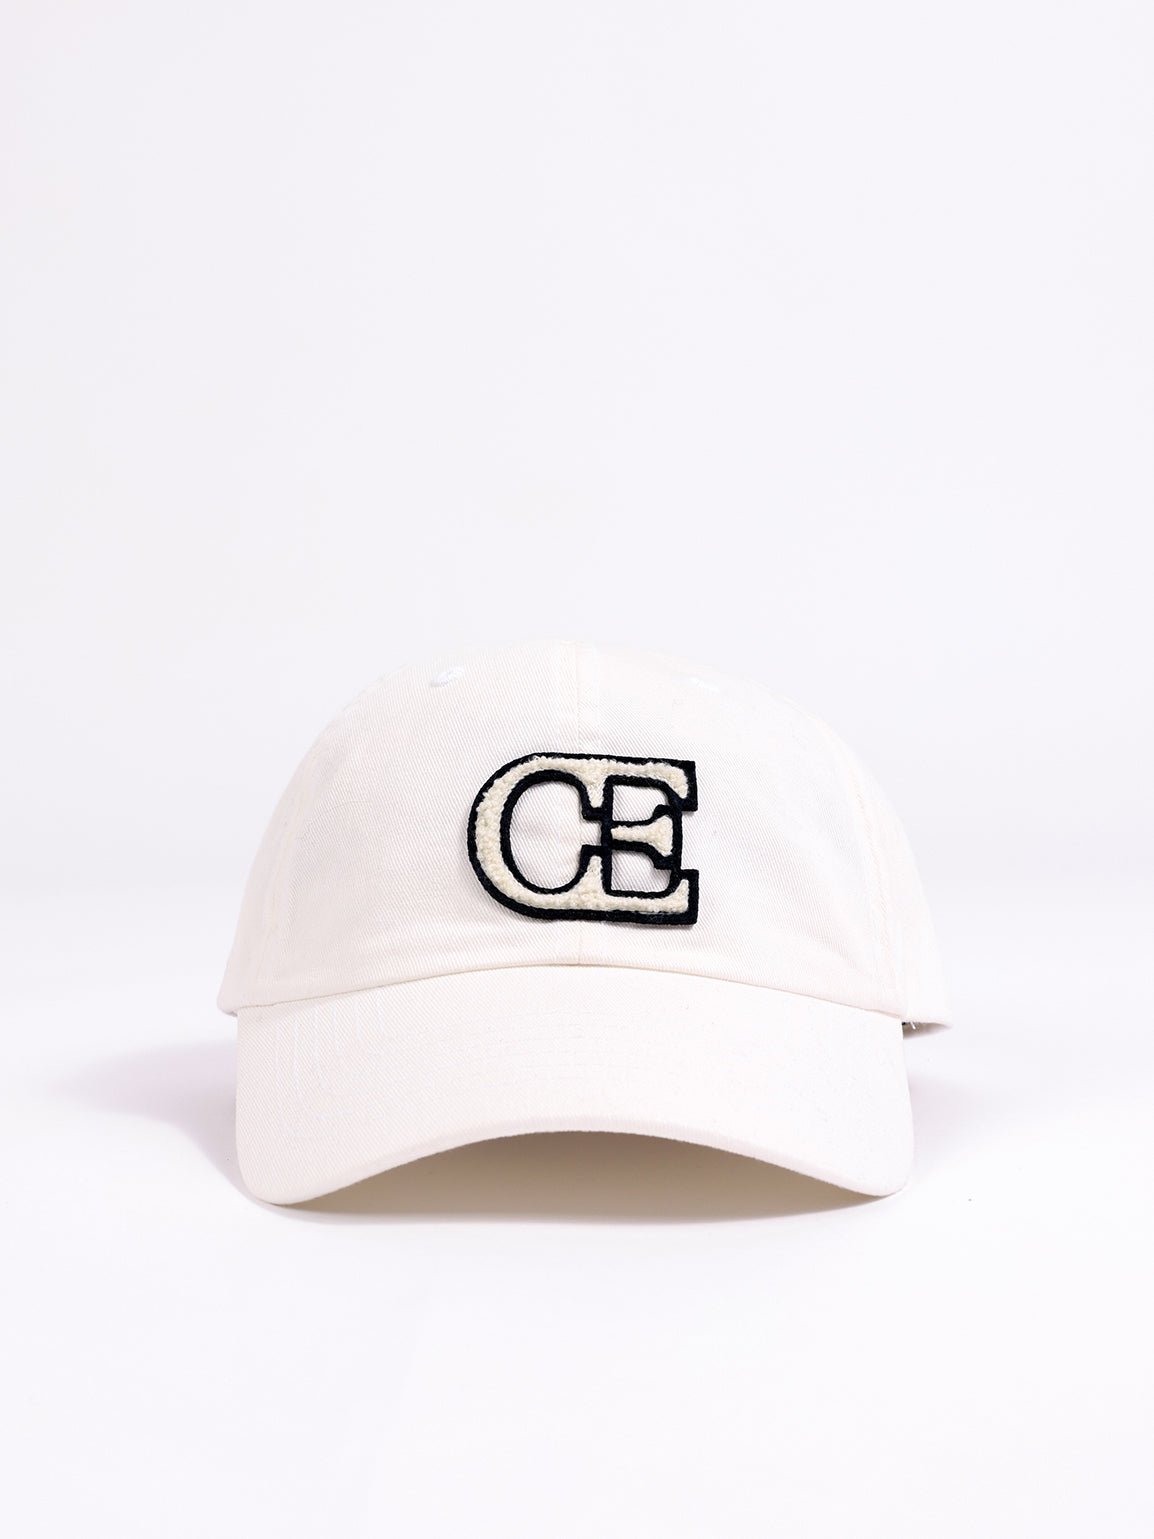 Washed cream vintage cap with white background |Color:Washed Cream